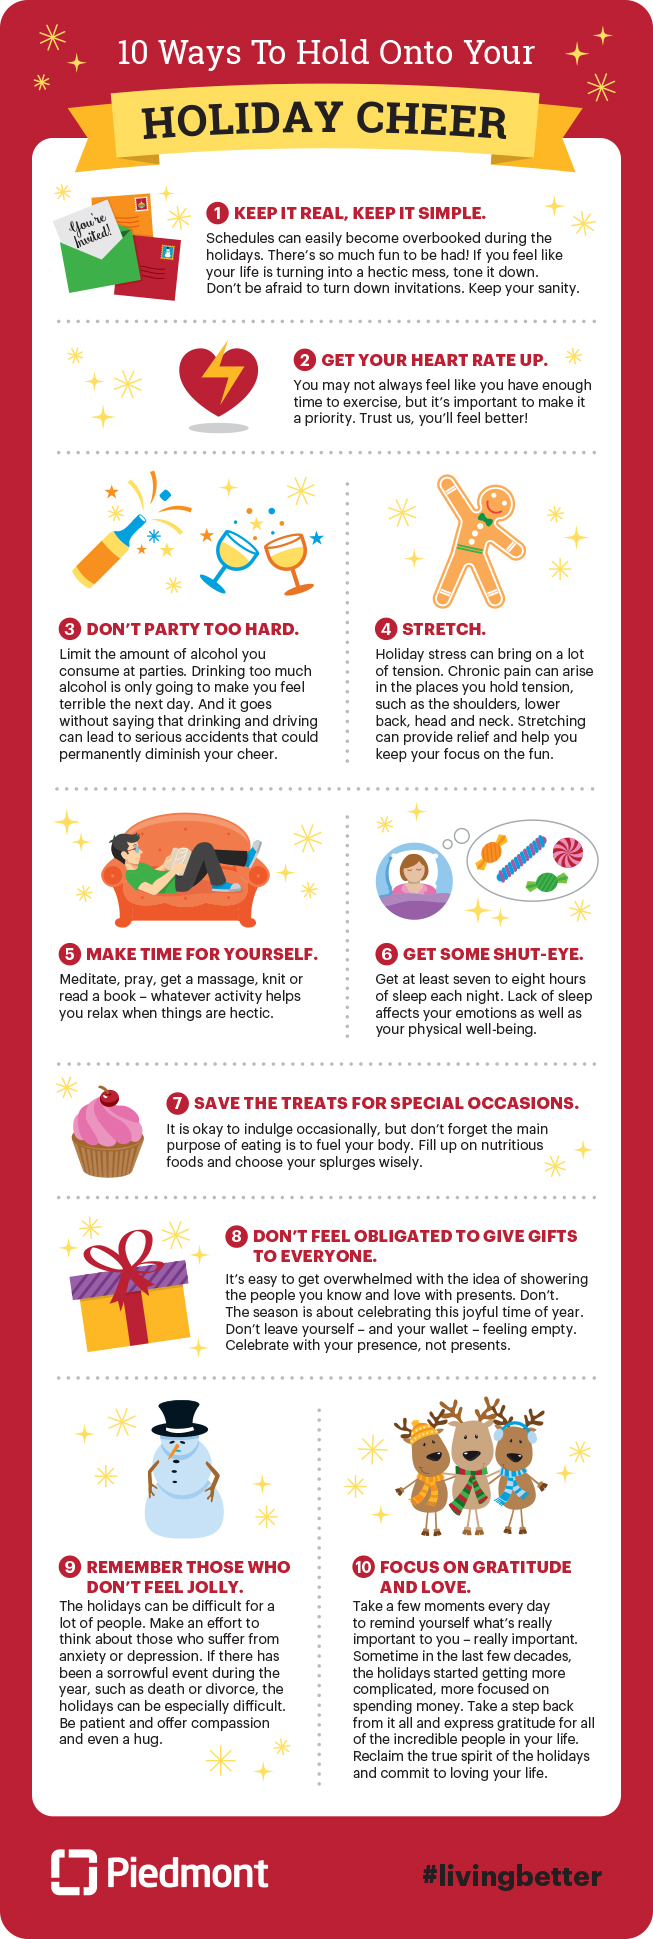 10 Ways To Hold On To Your Holiday Cheer | Piedmont Healthcare